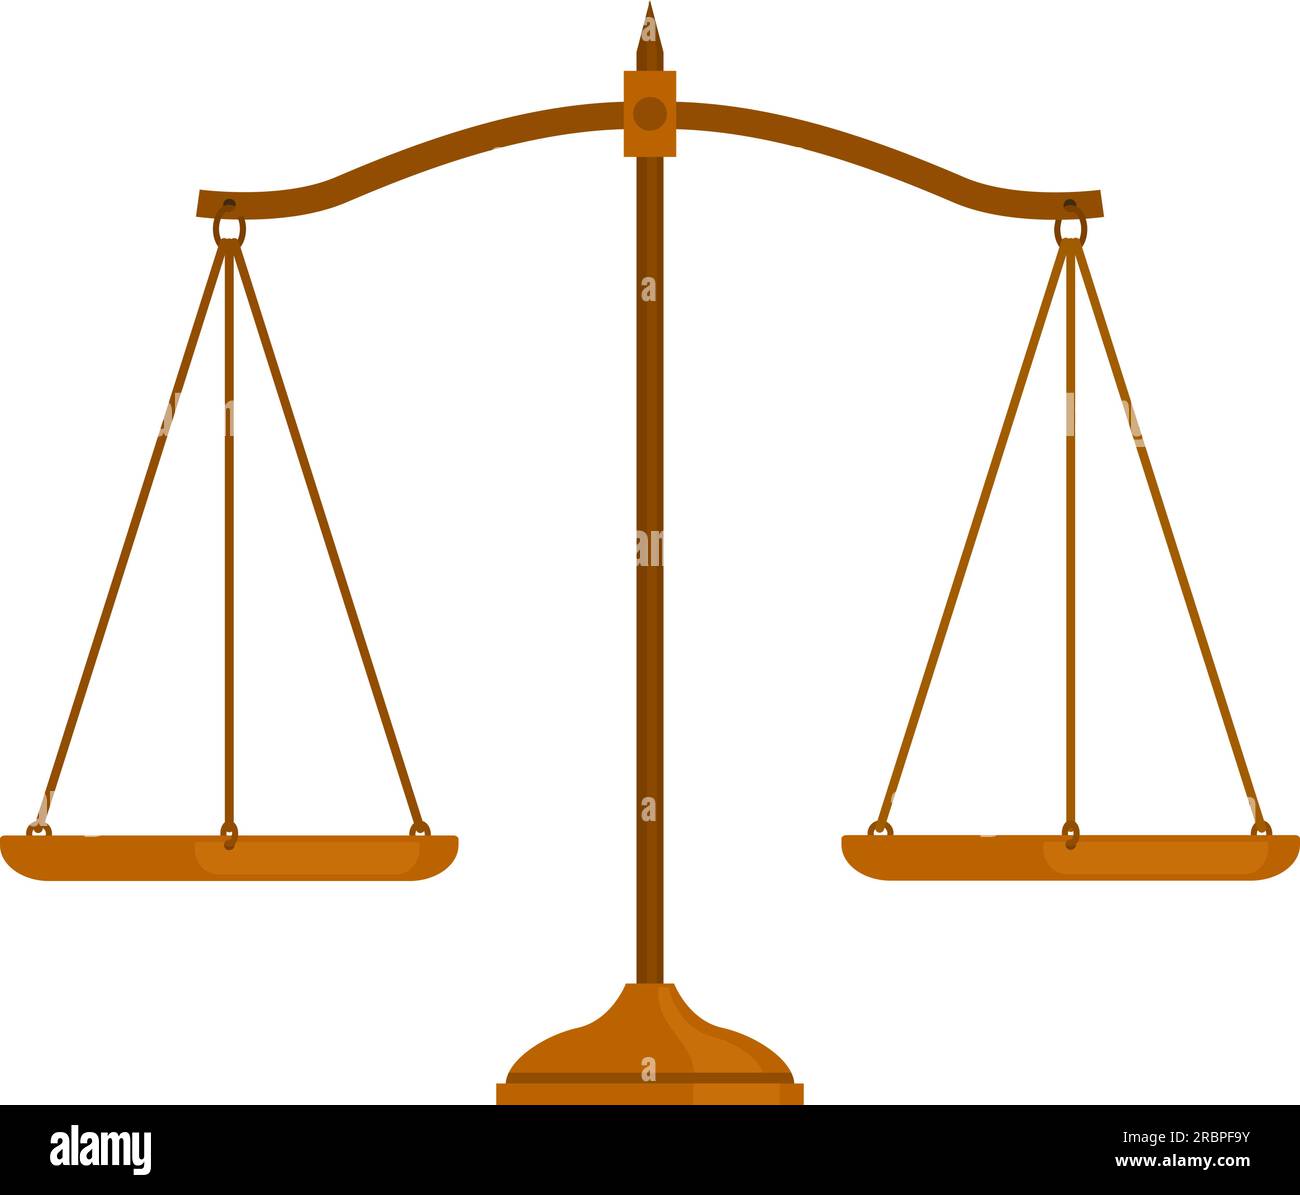 Scale of justice and law isolated: equality and legal system concept Stock Vector